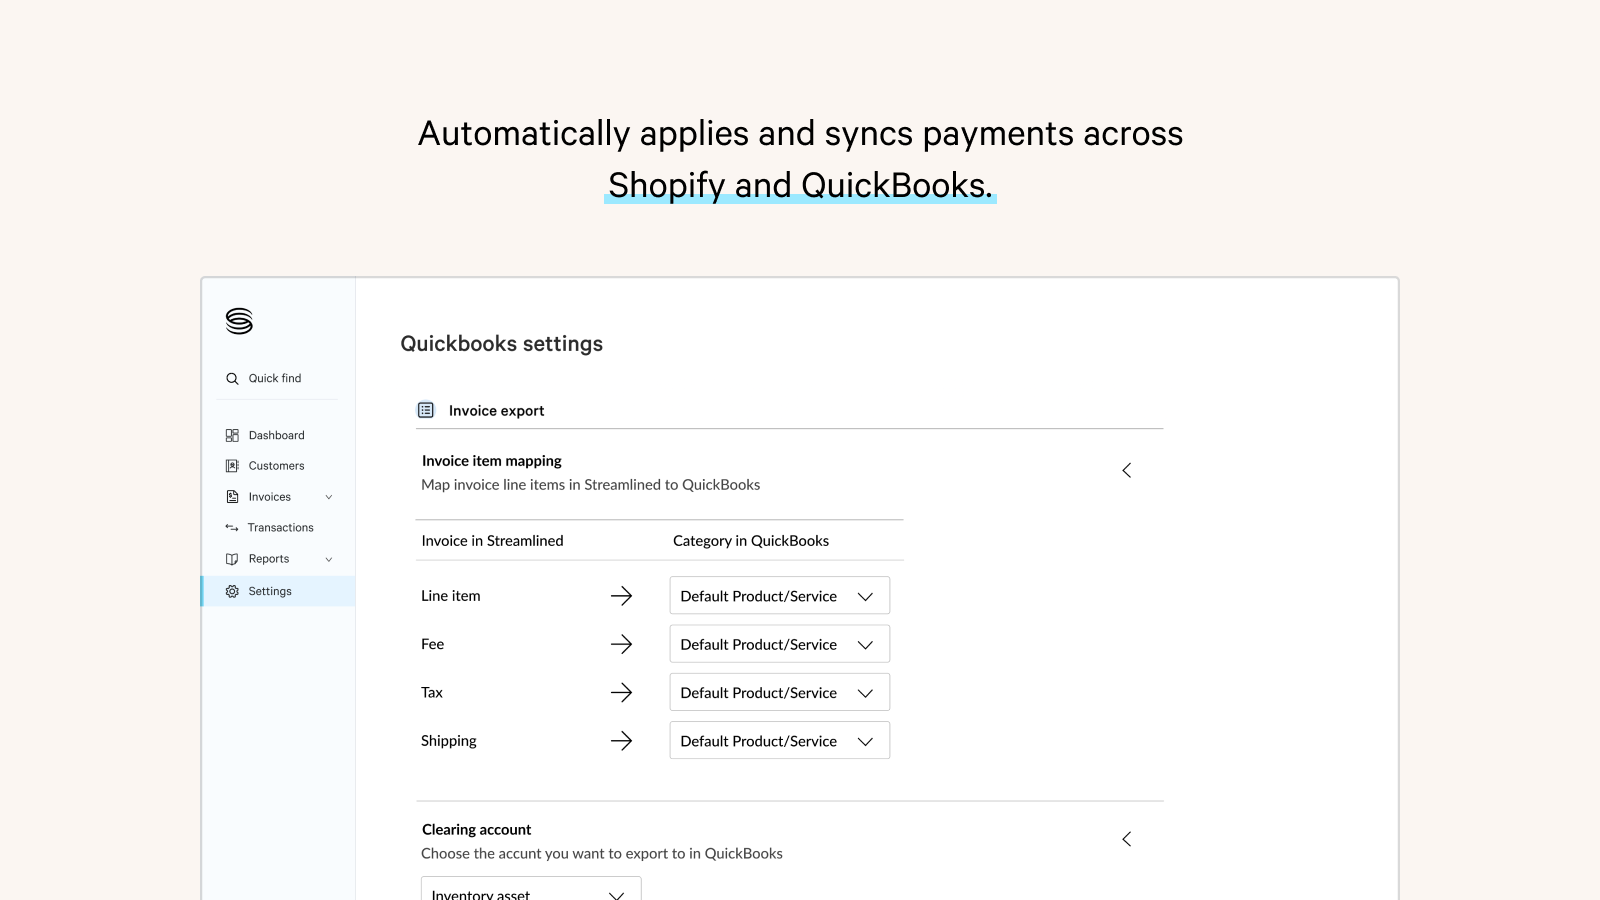 Automatically syncs with Quickbooks